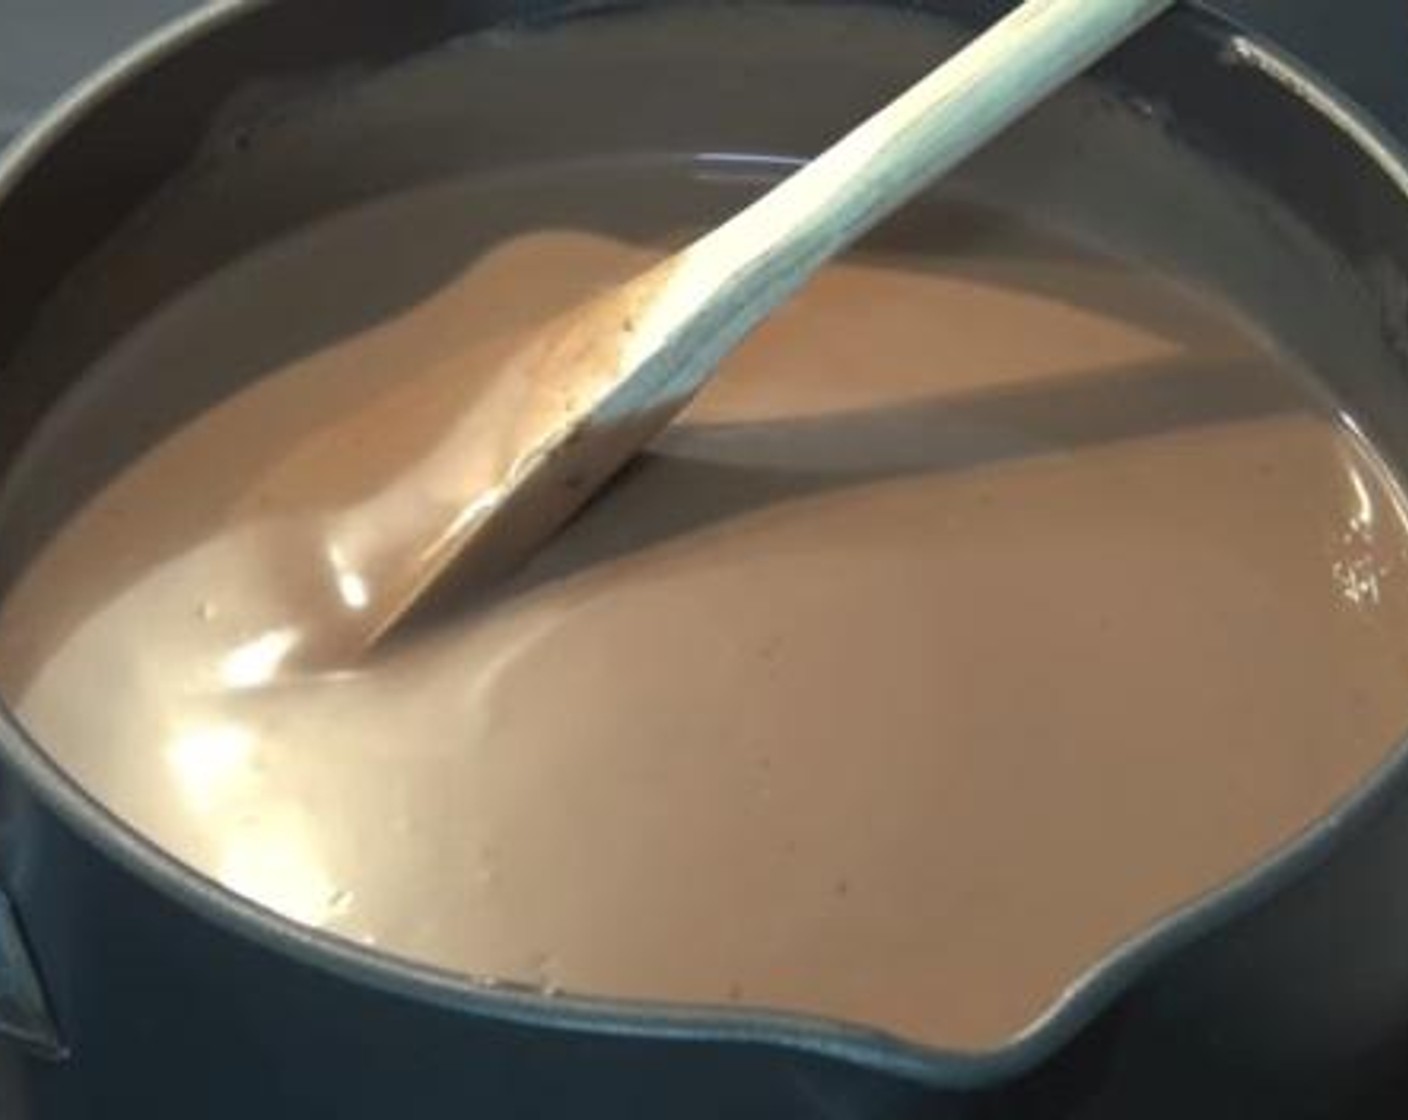 step 2 In a sauce pan over low heat, mix together the Whipping Cream (3 1/3 cups), and Nutella® (1 2/3 cups). Then, Add in the gelatin mixture and mix everything well to combine.